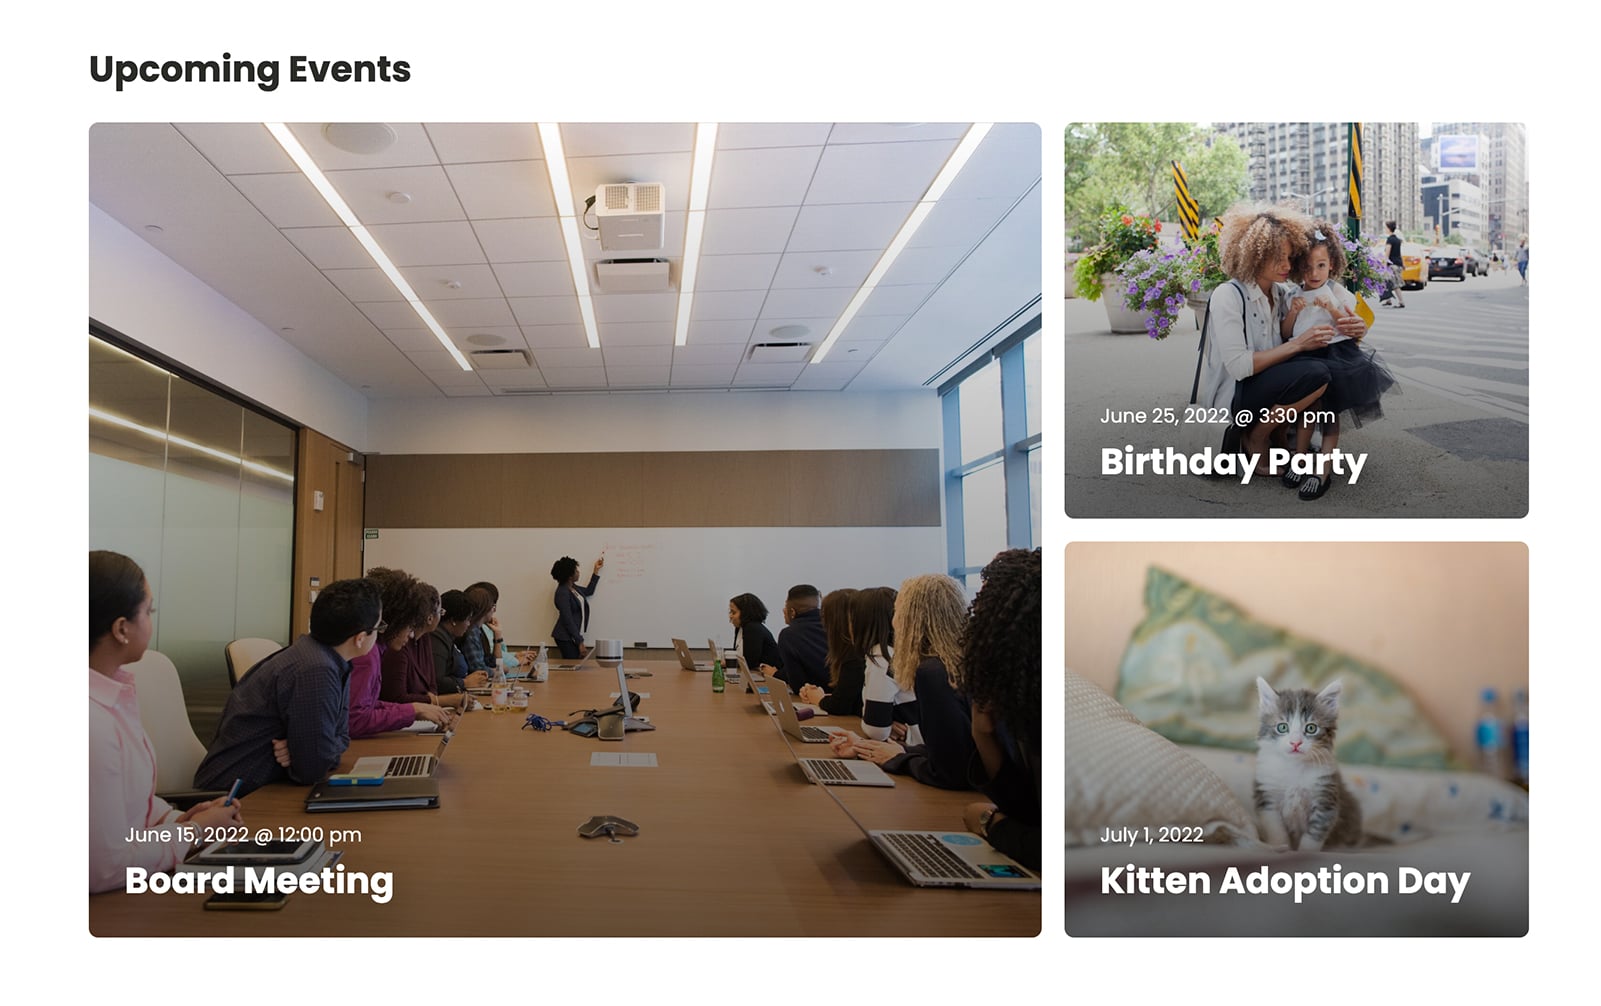 Upcoming Events in a Custom Grid Layout with The Events Calendar